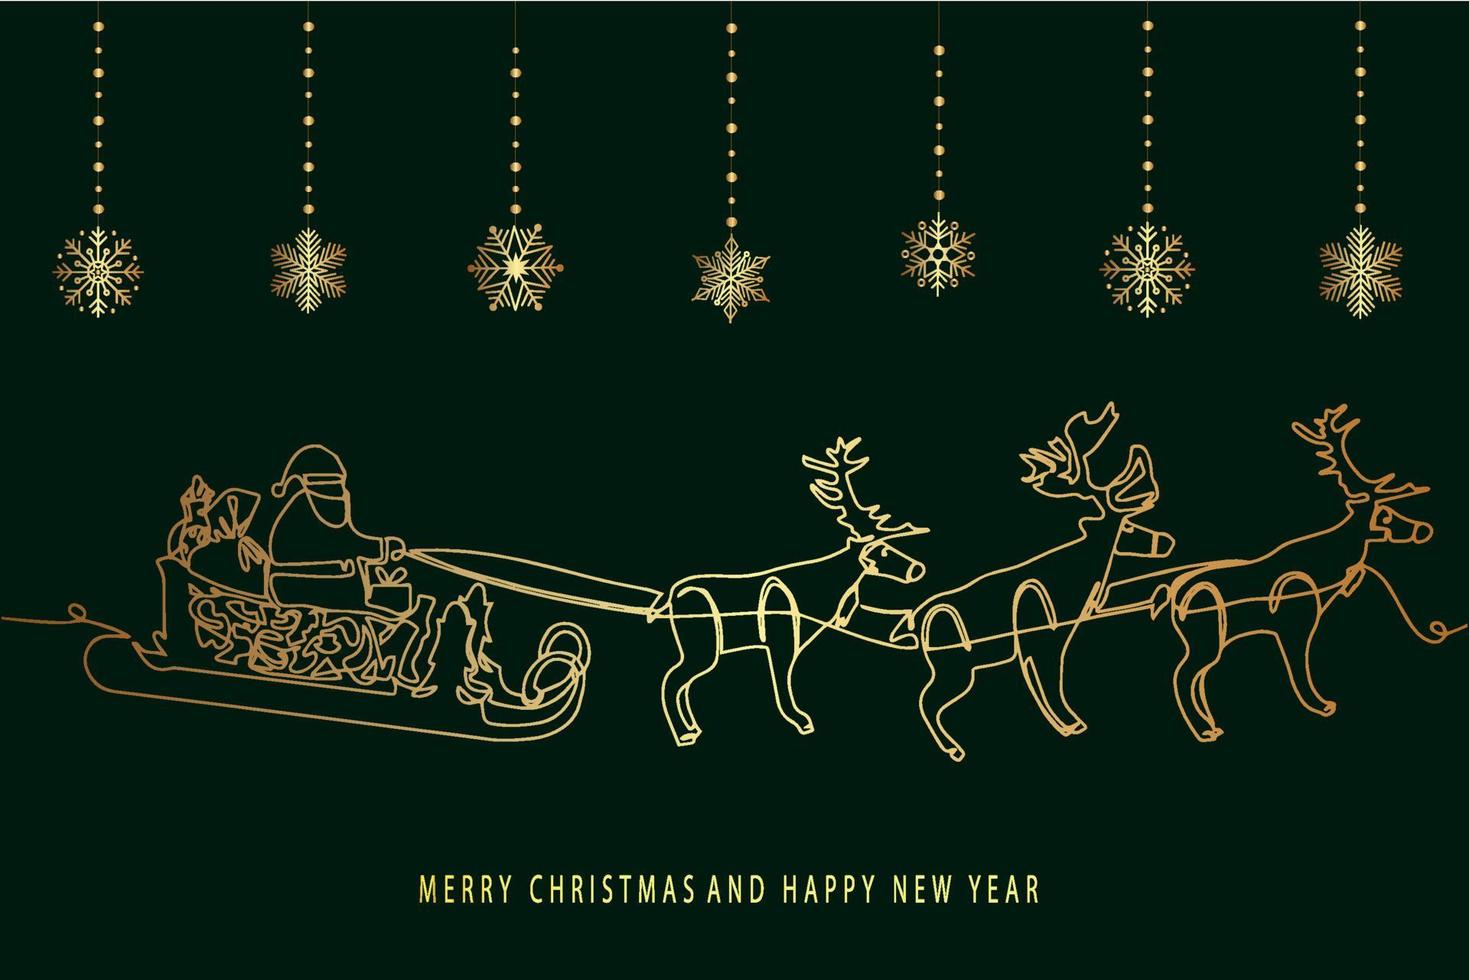 Sleigh with reindeer, Santa Claus sleigh drawn with one line. Christmas card vector